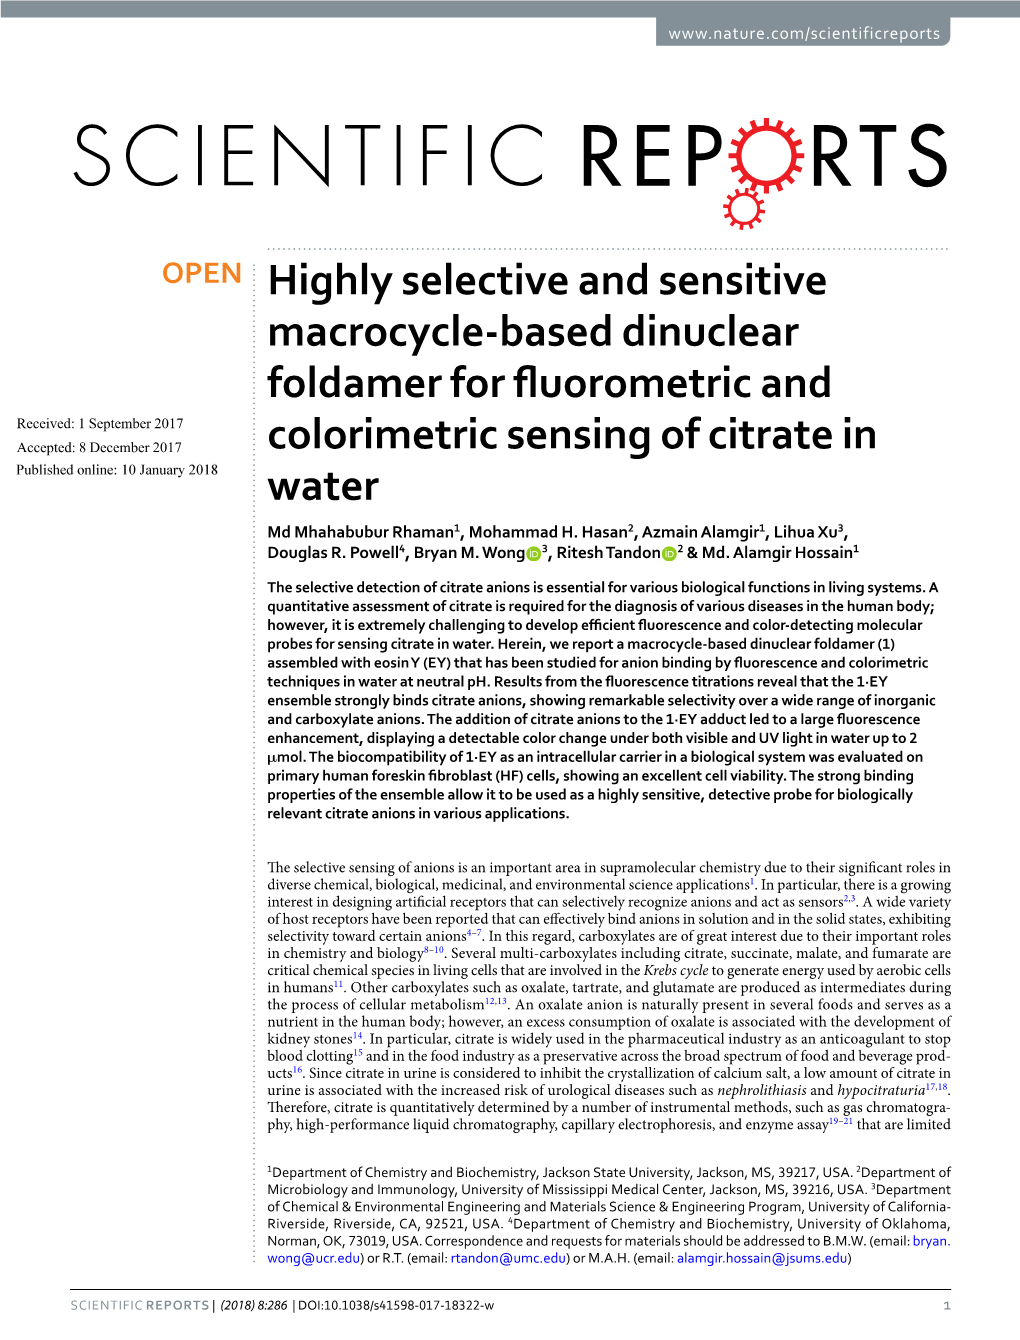 Highly Selective and Sensitive Macrocycle-Based Dinuclear